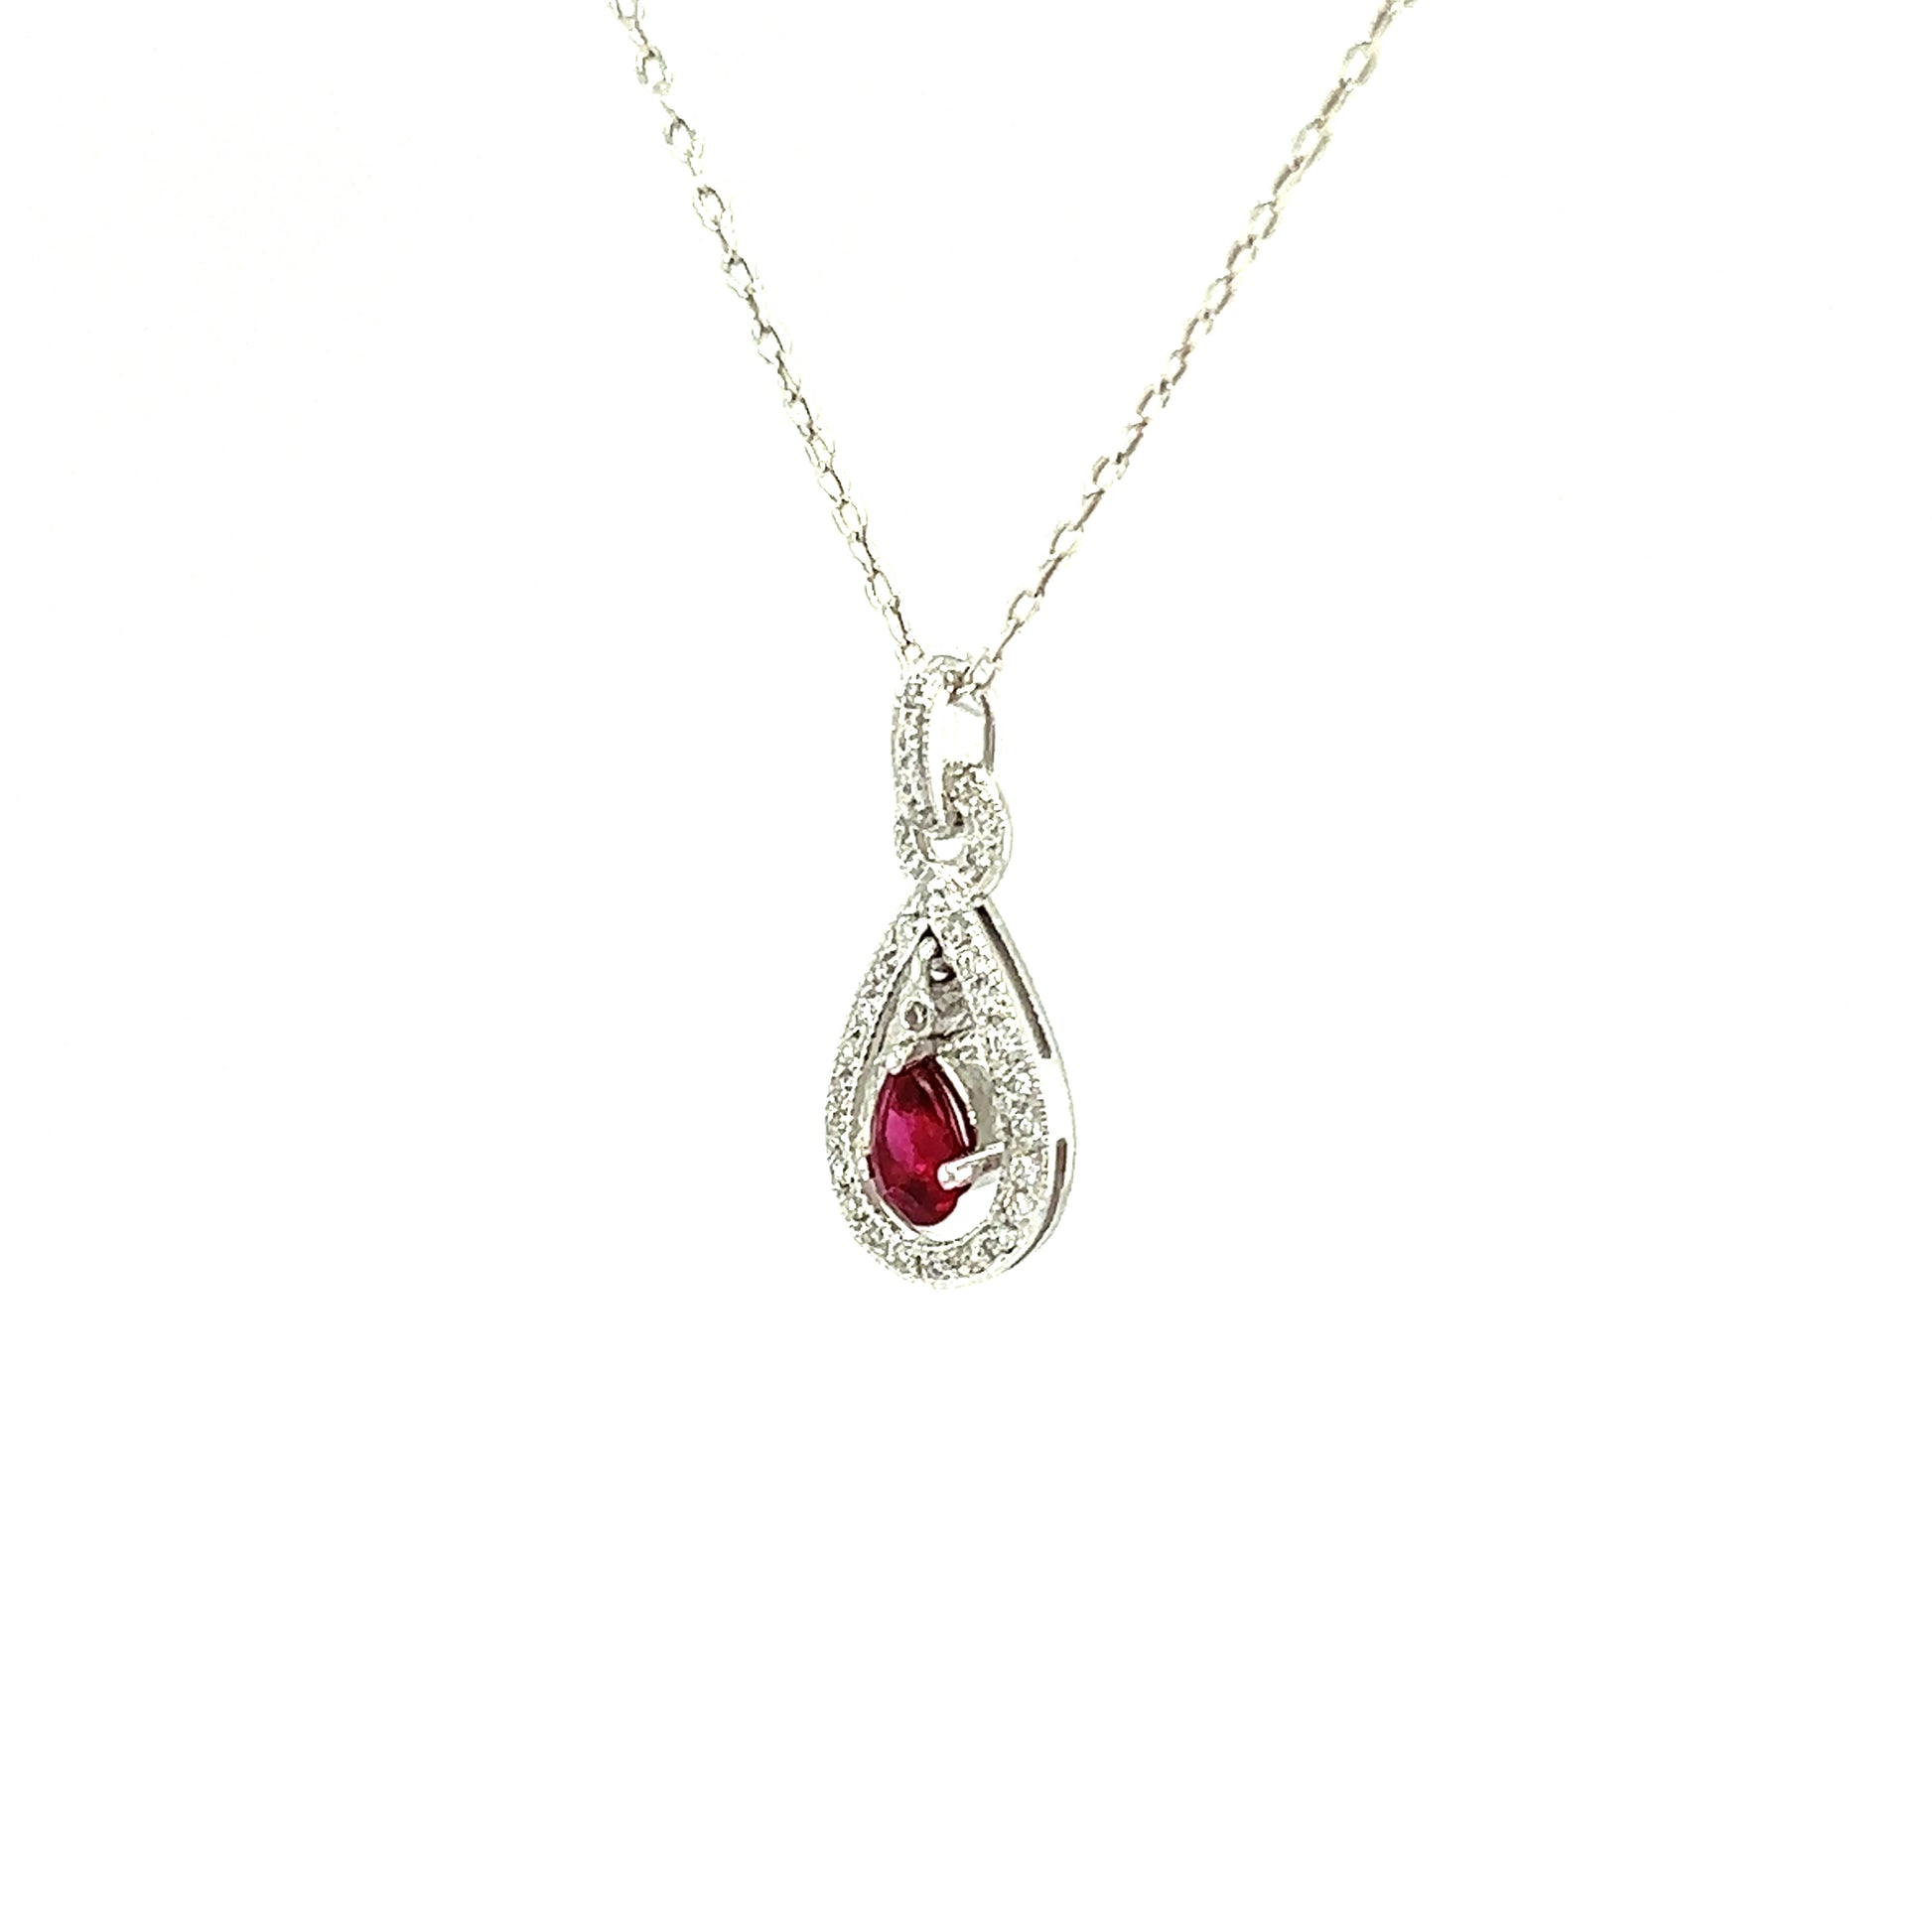 Dangling Pear Ruby Pendant with Diamond Accents in 14K White Gold Pendant and Chain Right Side View